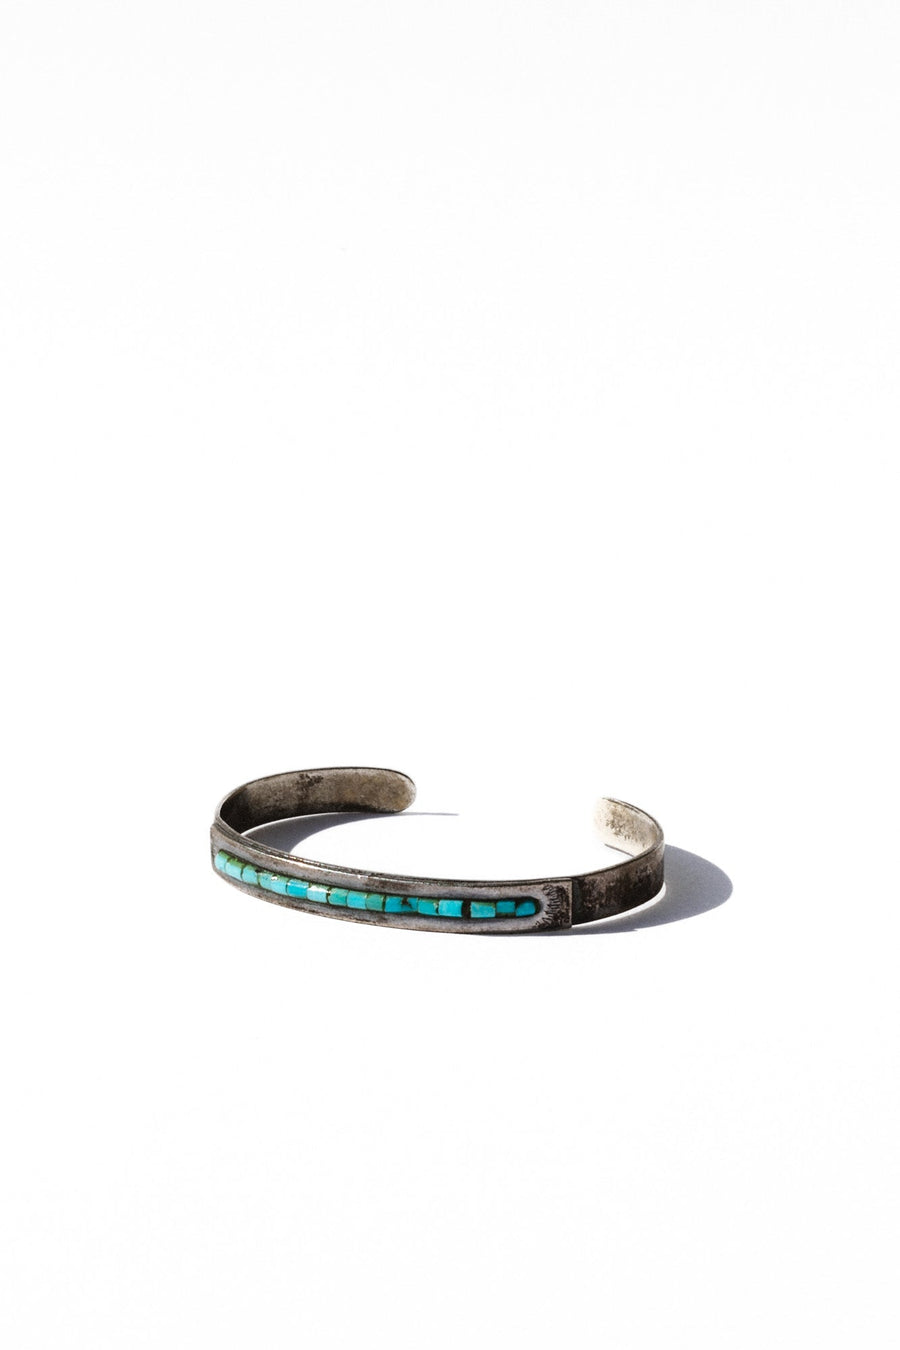 Ayman Jewelry Silver / Turquoise Blue Hour Antique Zuni Cuff